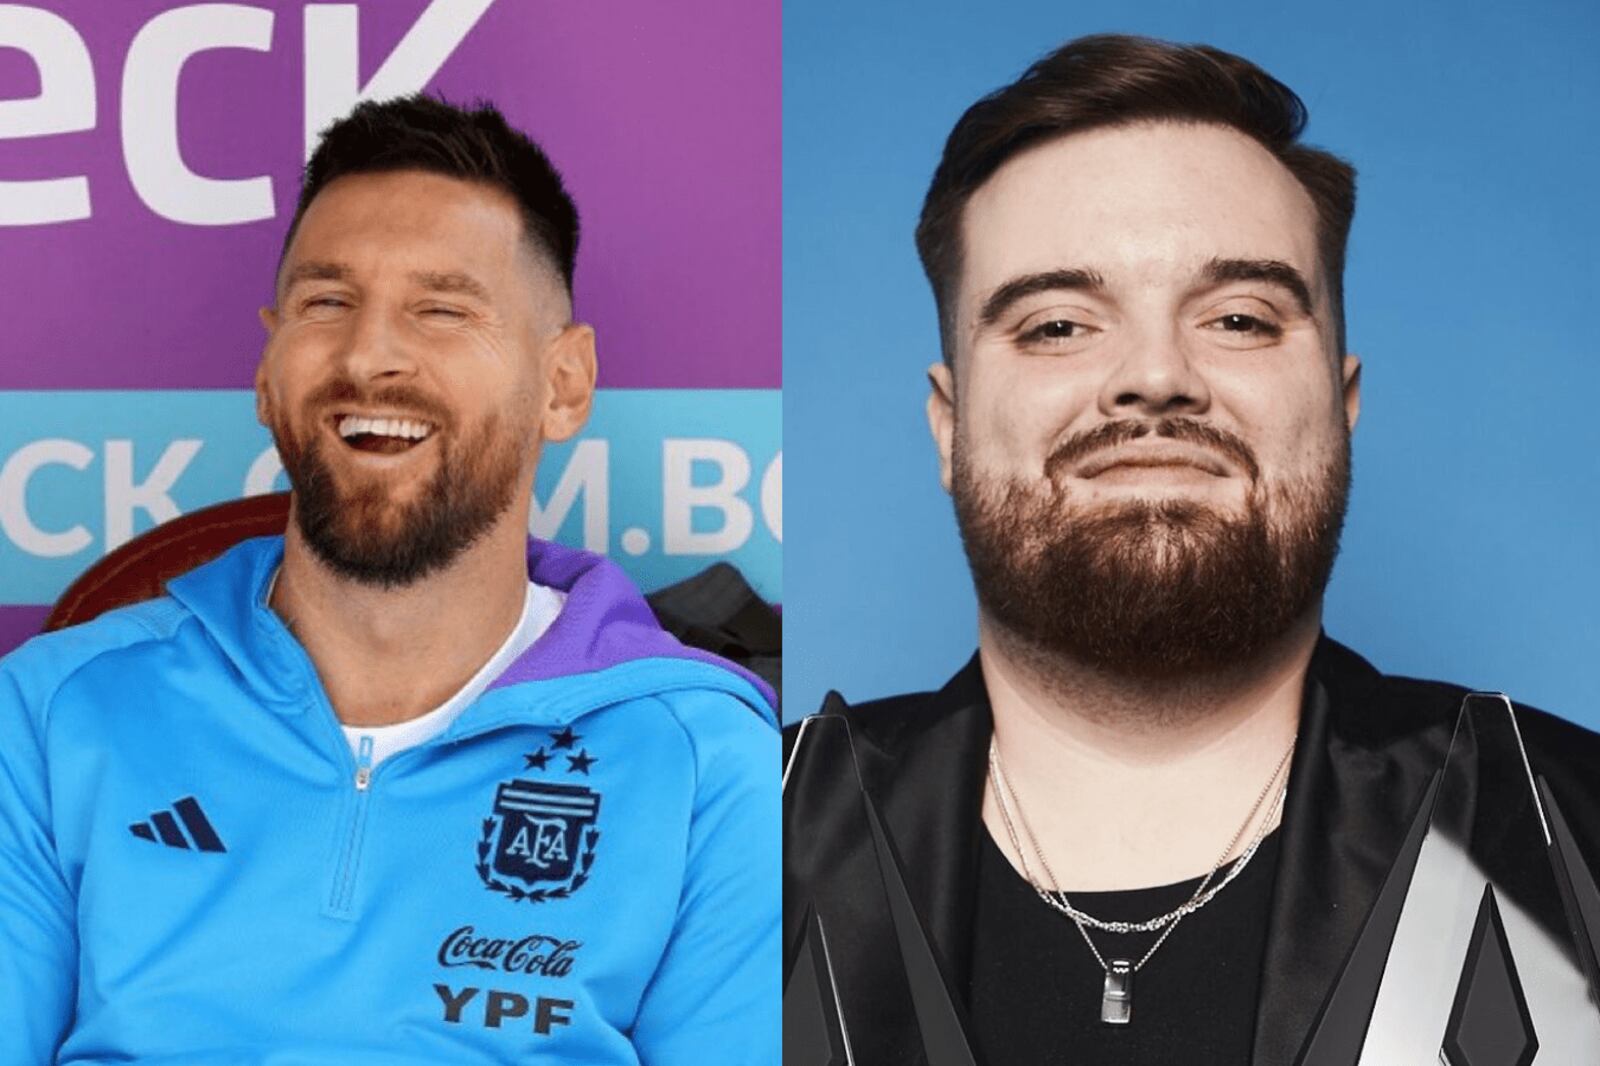 The fun challenge between Messi and Ibai that went viral